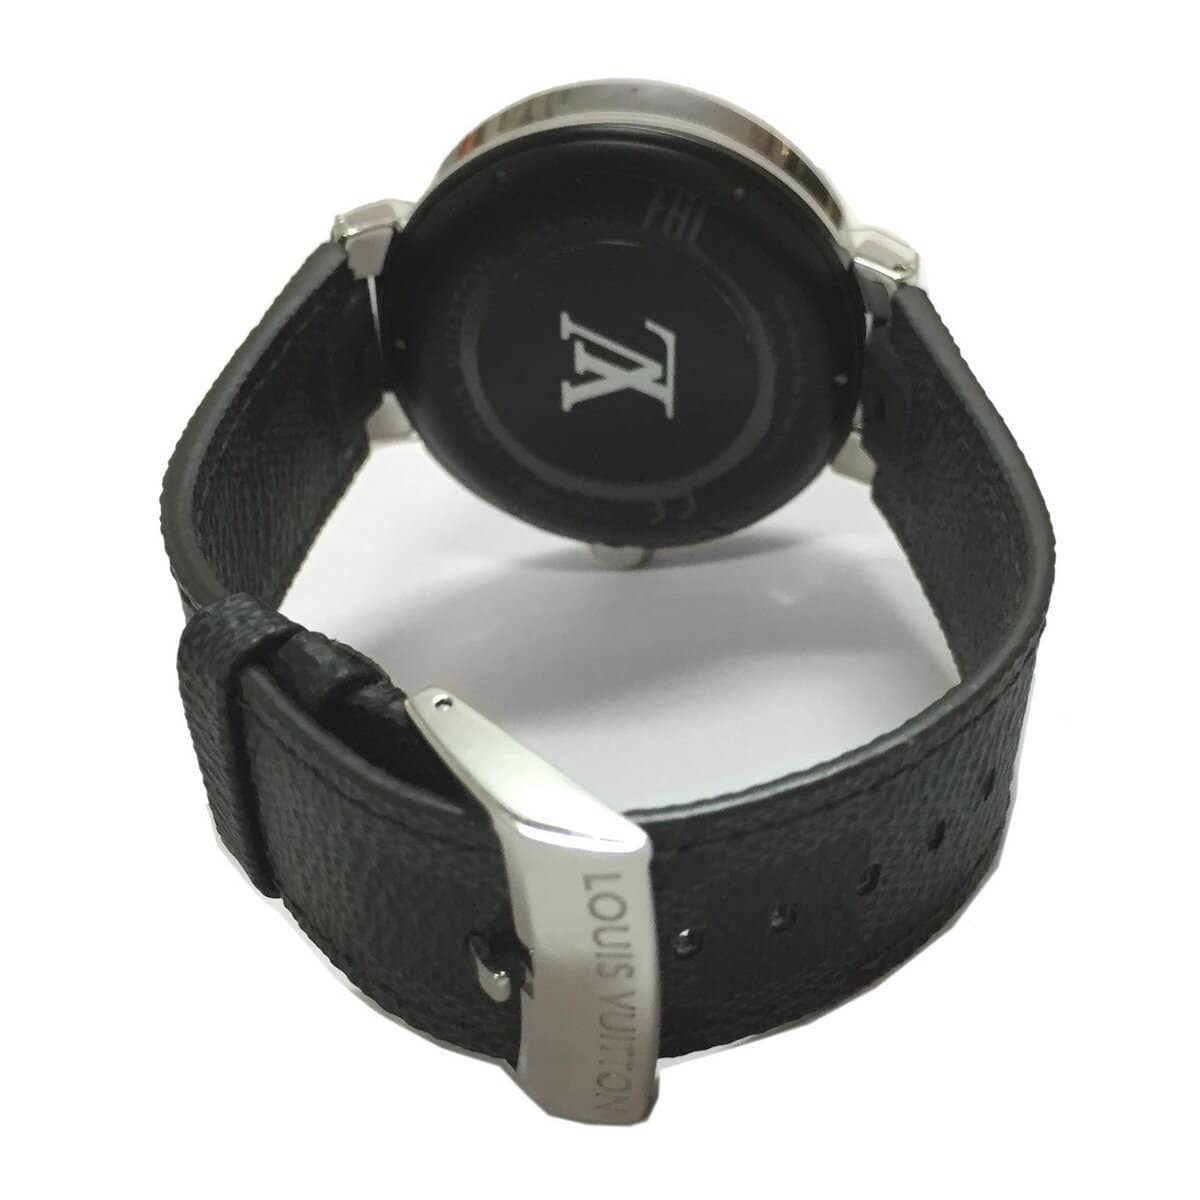 New]Louis Vuitton Connected Watch Tambour Horizon V2 Charger Kid